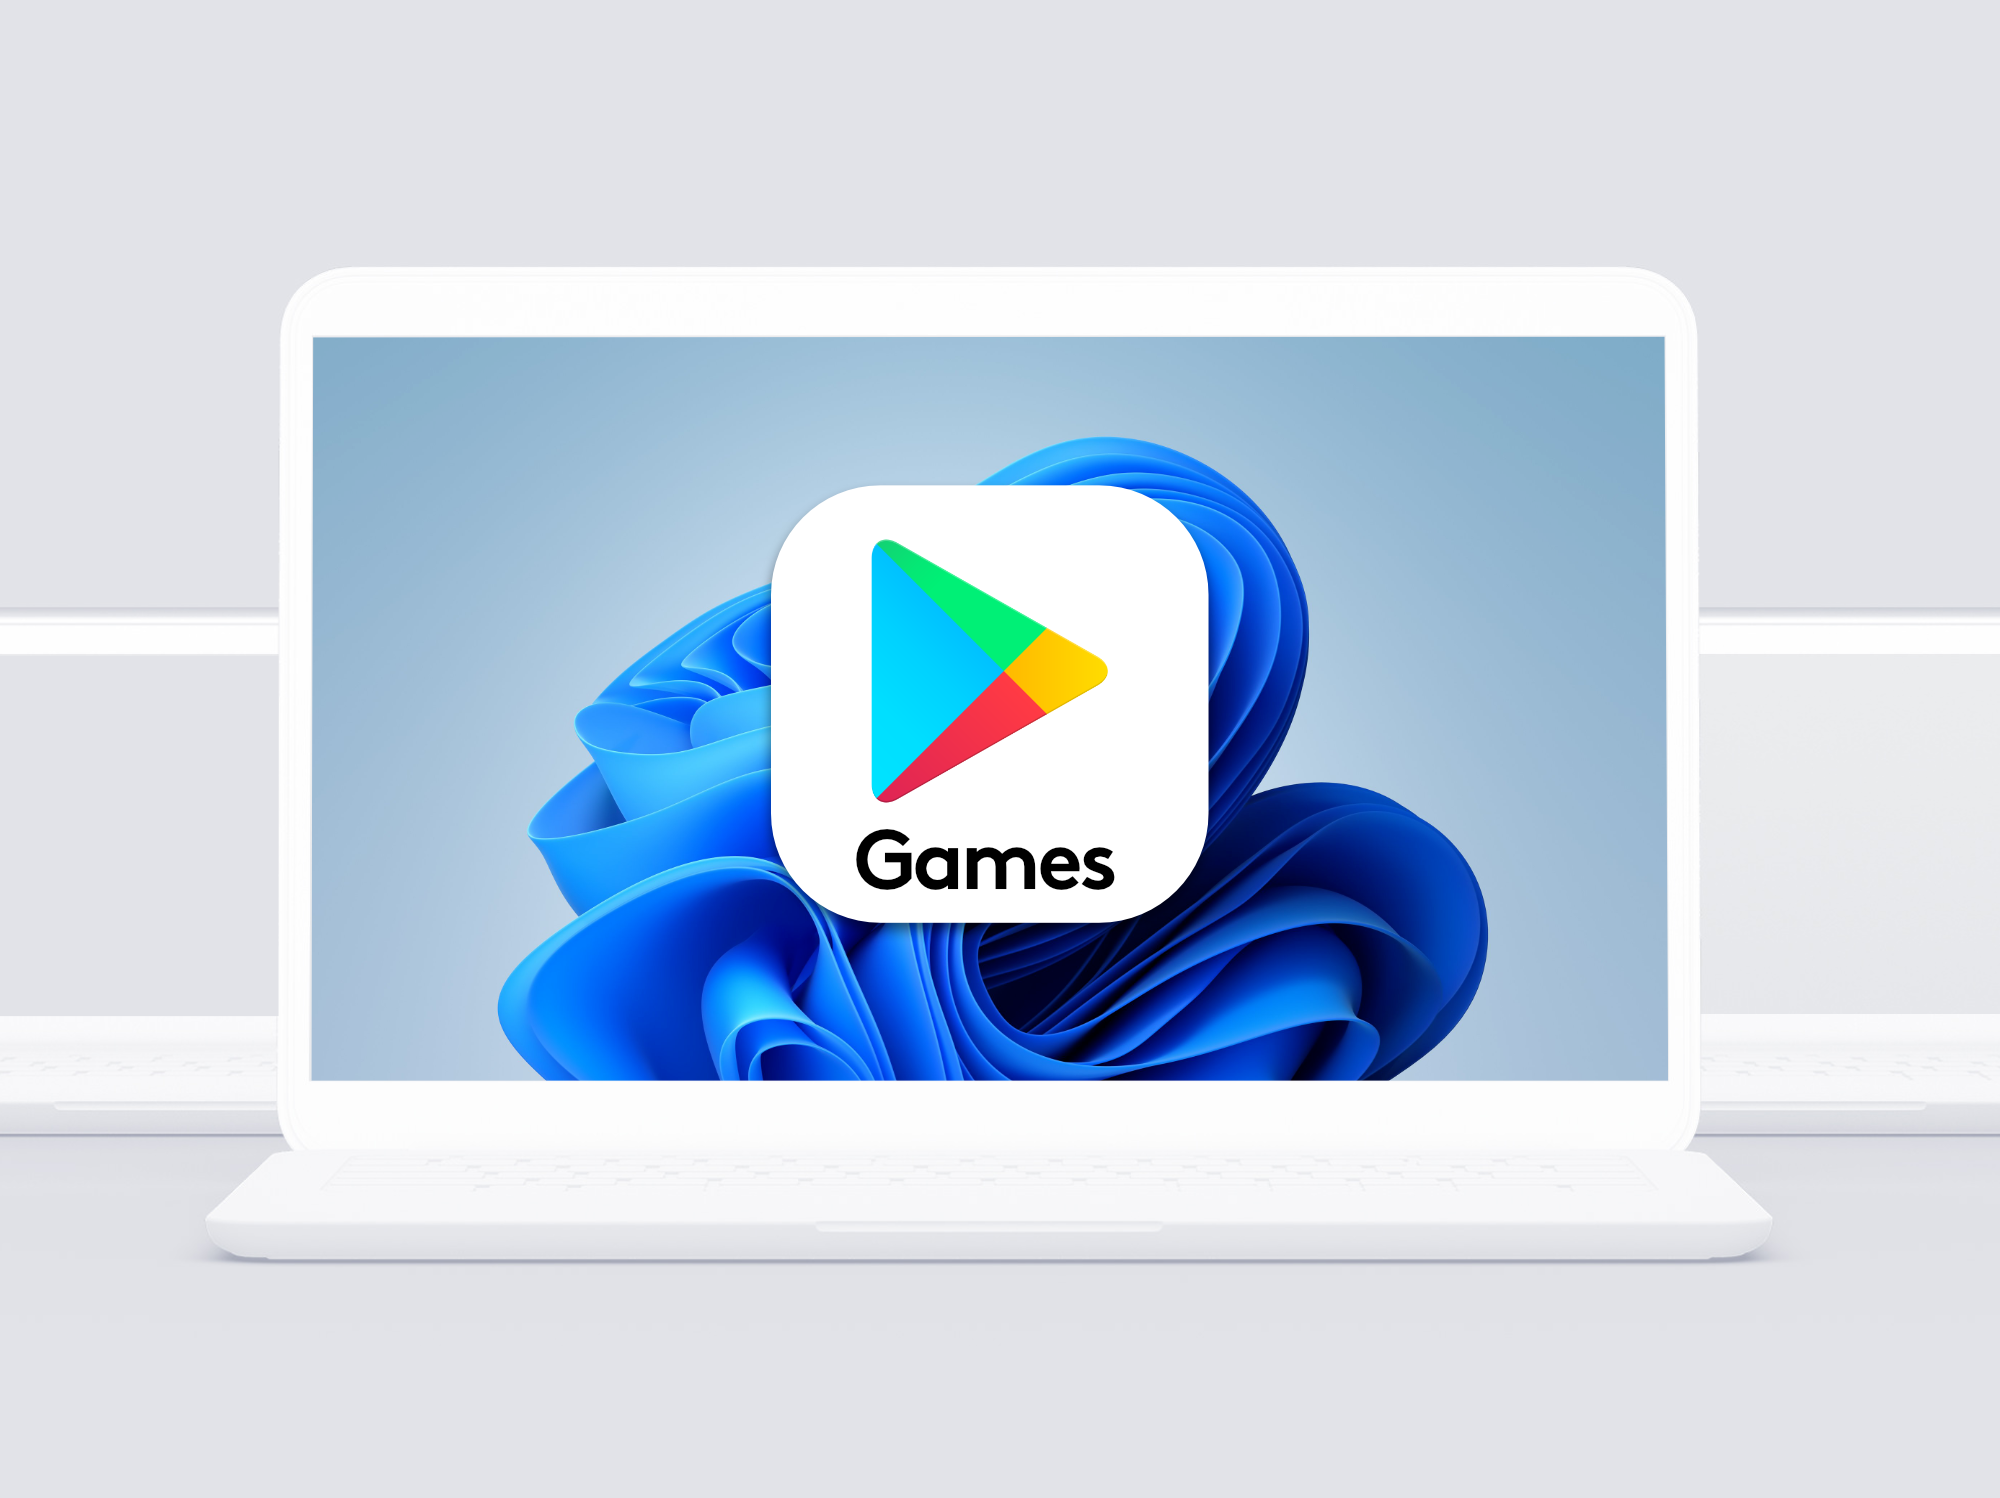 Google to bring Google Play Games to Windows PCs in 2022